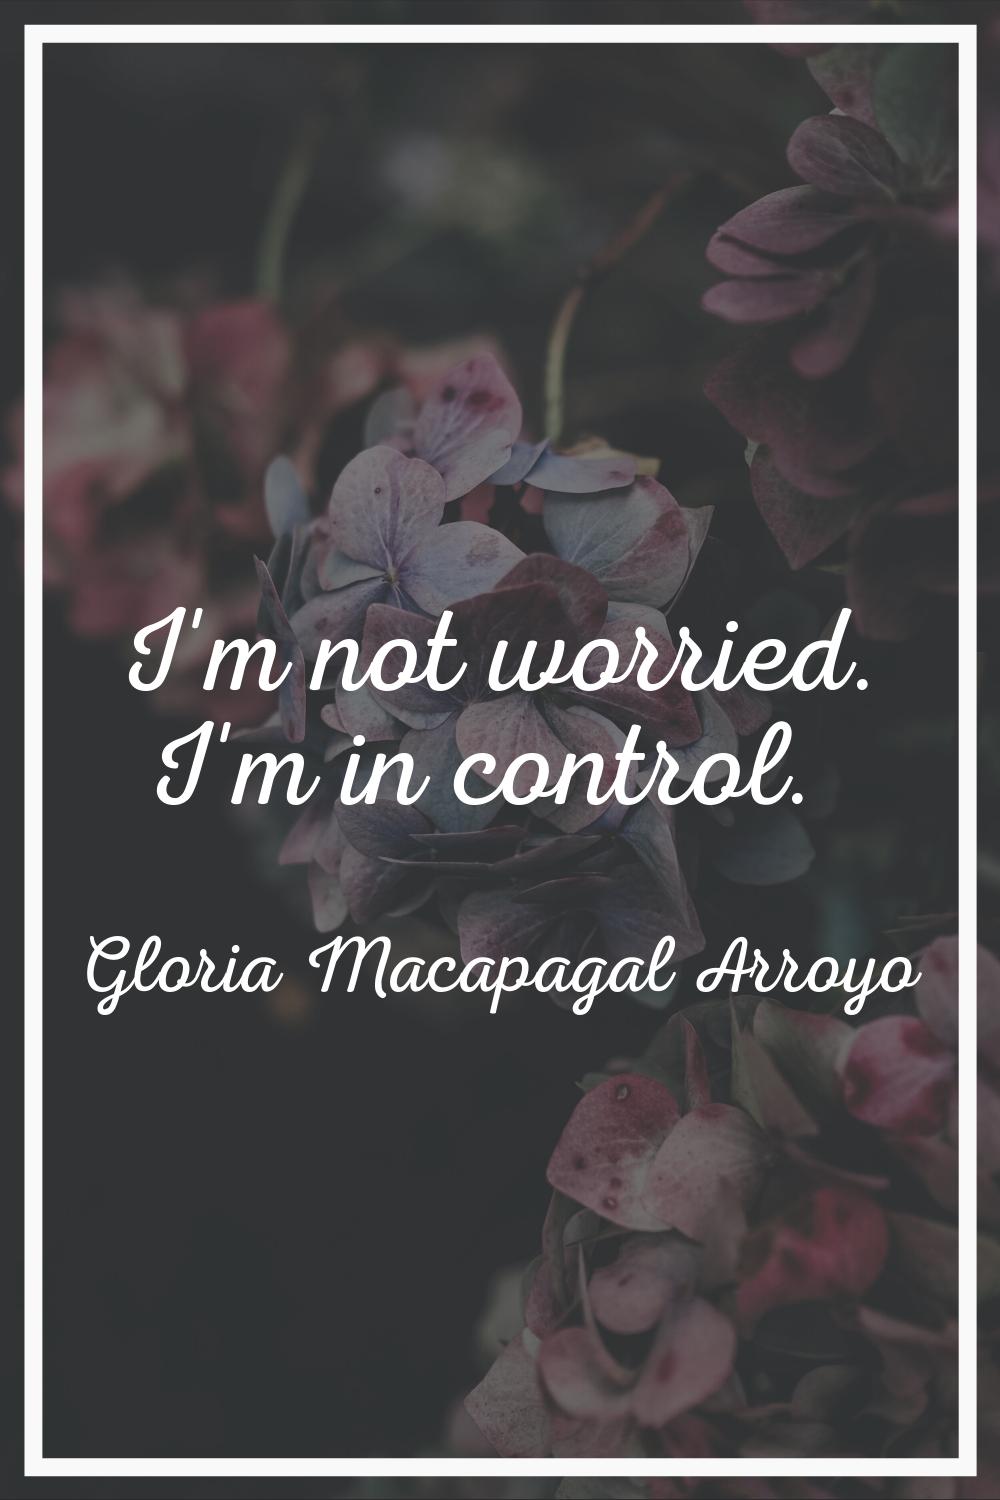 I'm not worried. I'm in control.